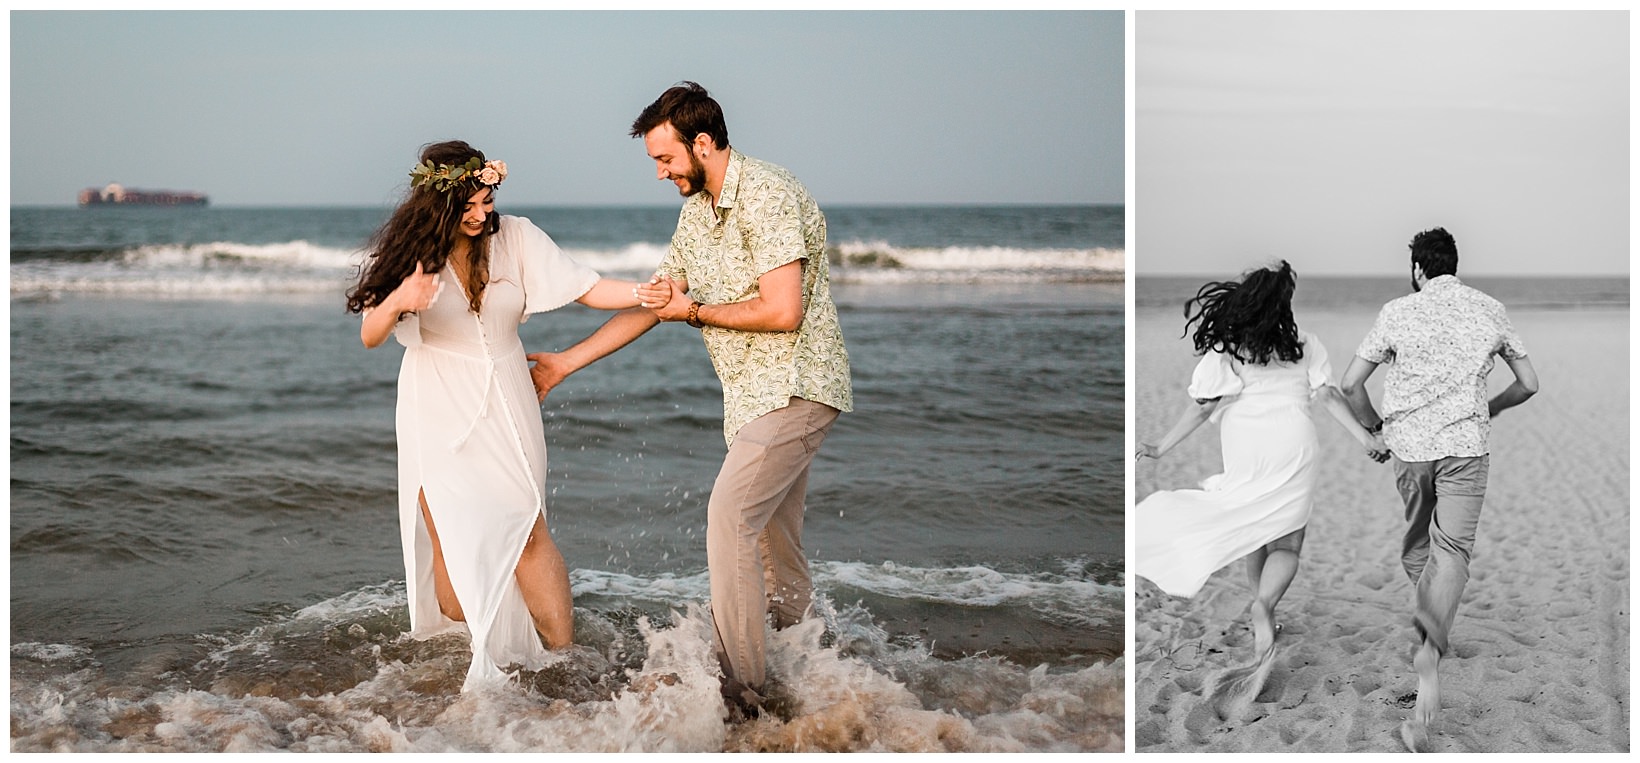 Virginia beachy indie elopement wedding photographer couple inspiration in the ocean and running on beach